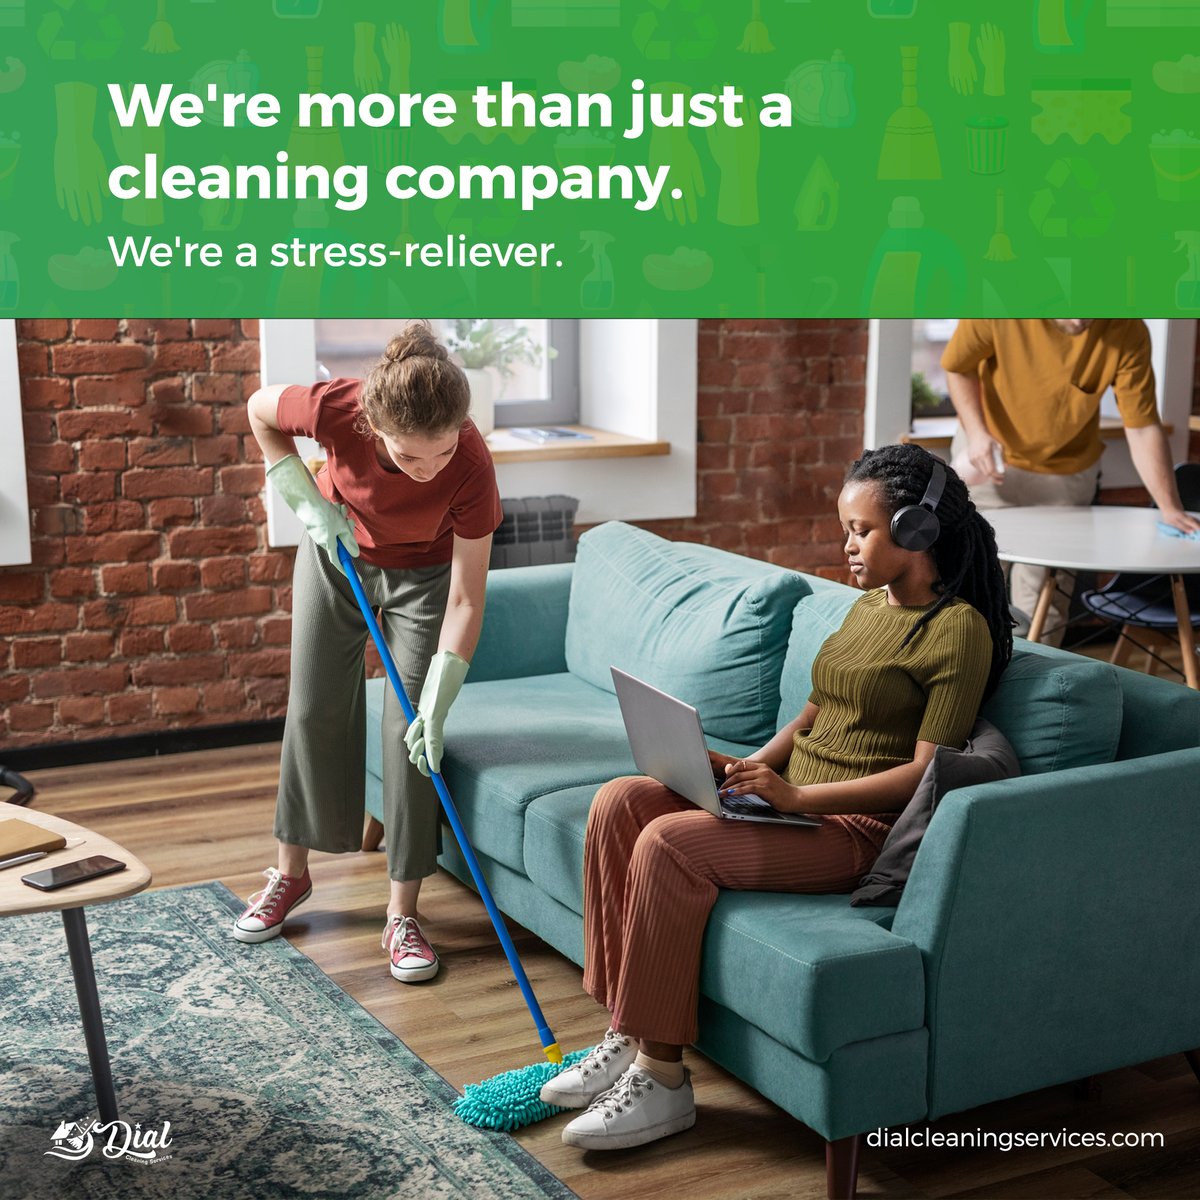 At dialcleaningservices We're more than just a cleaning company, We will help clean and organize your home without you breaking a sweat 😅. 

#cleanhome #cleaningexperts #cleaningcompany
#cleanhome
#cleaningprofessionals
#stressfree
#cleanhomehappyhome
#dialcleaningservices